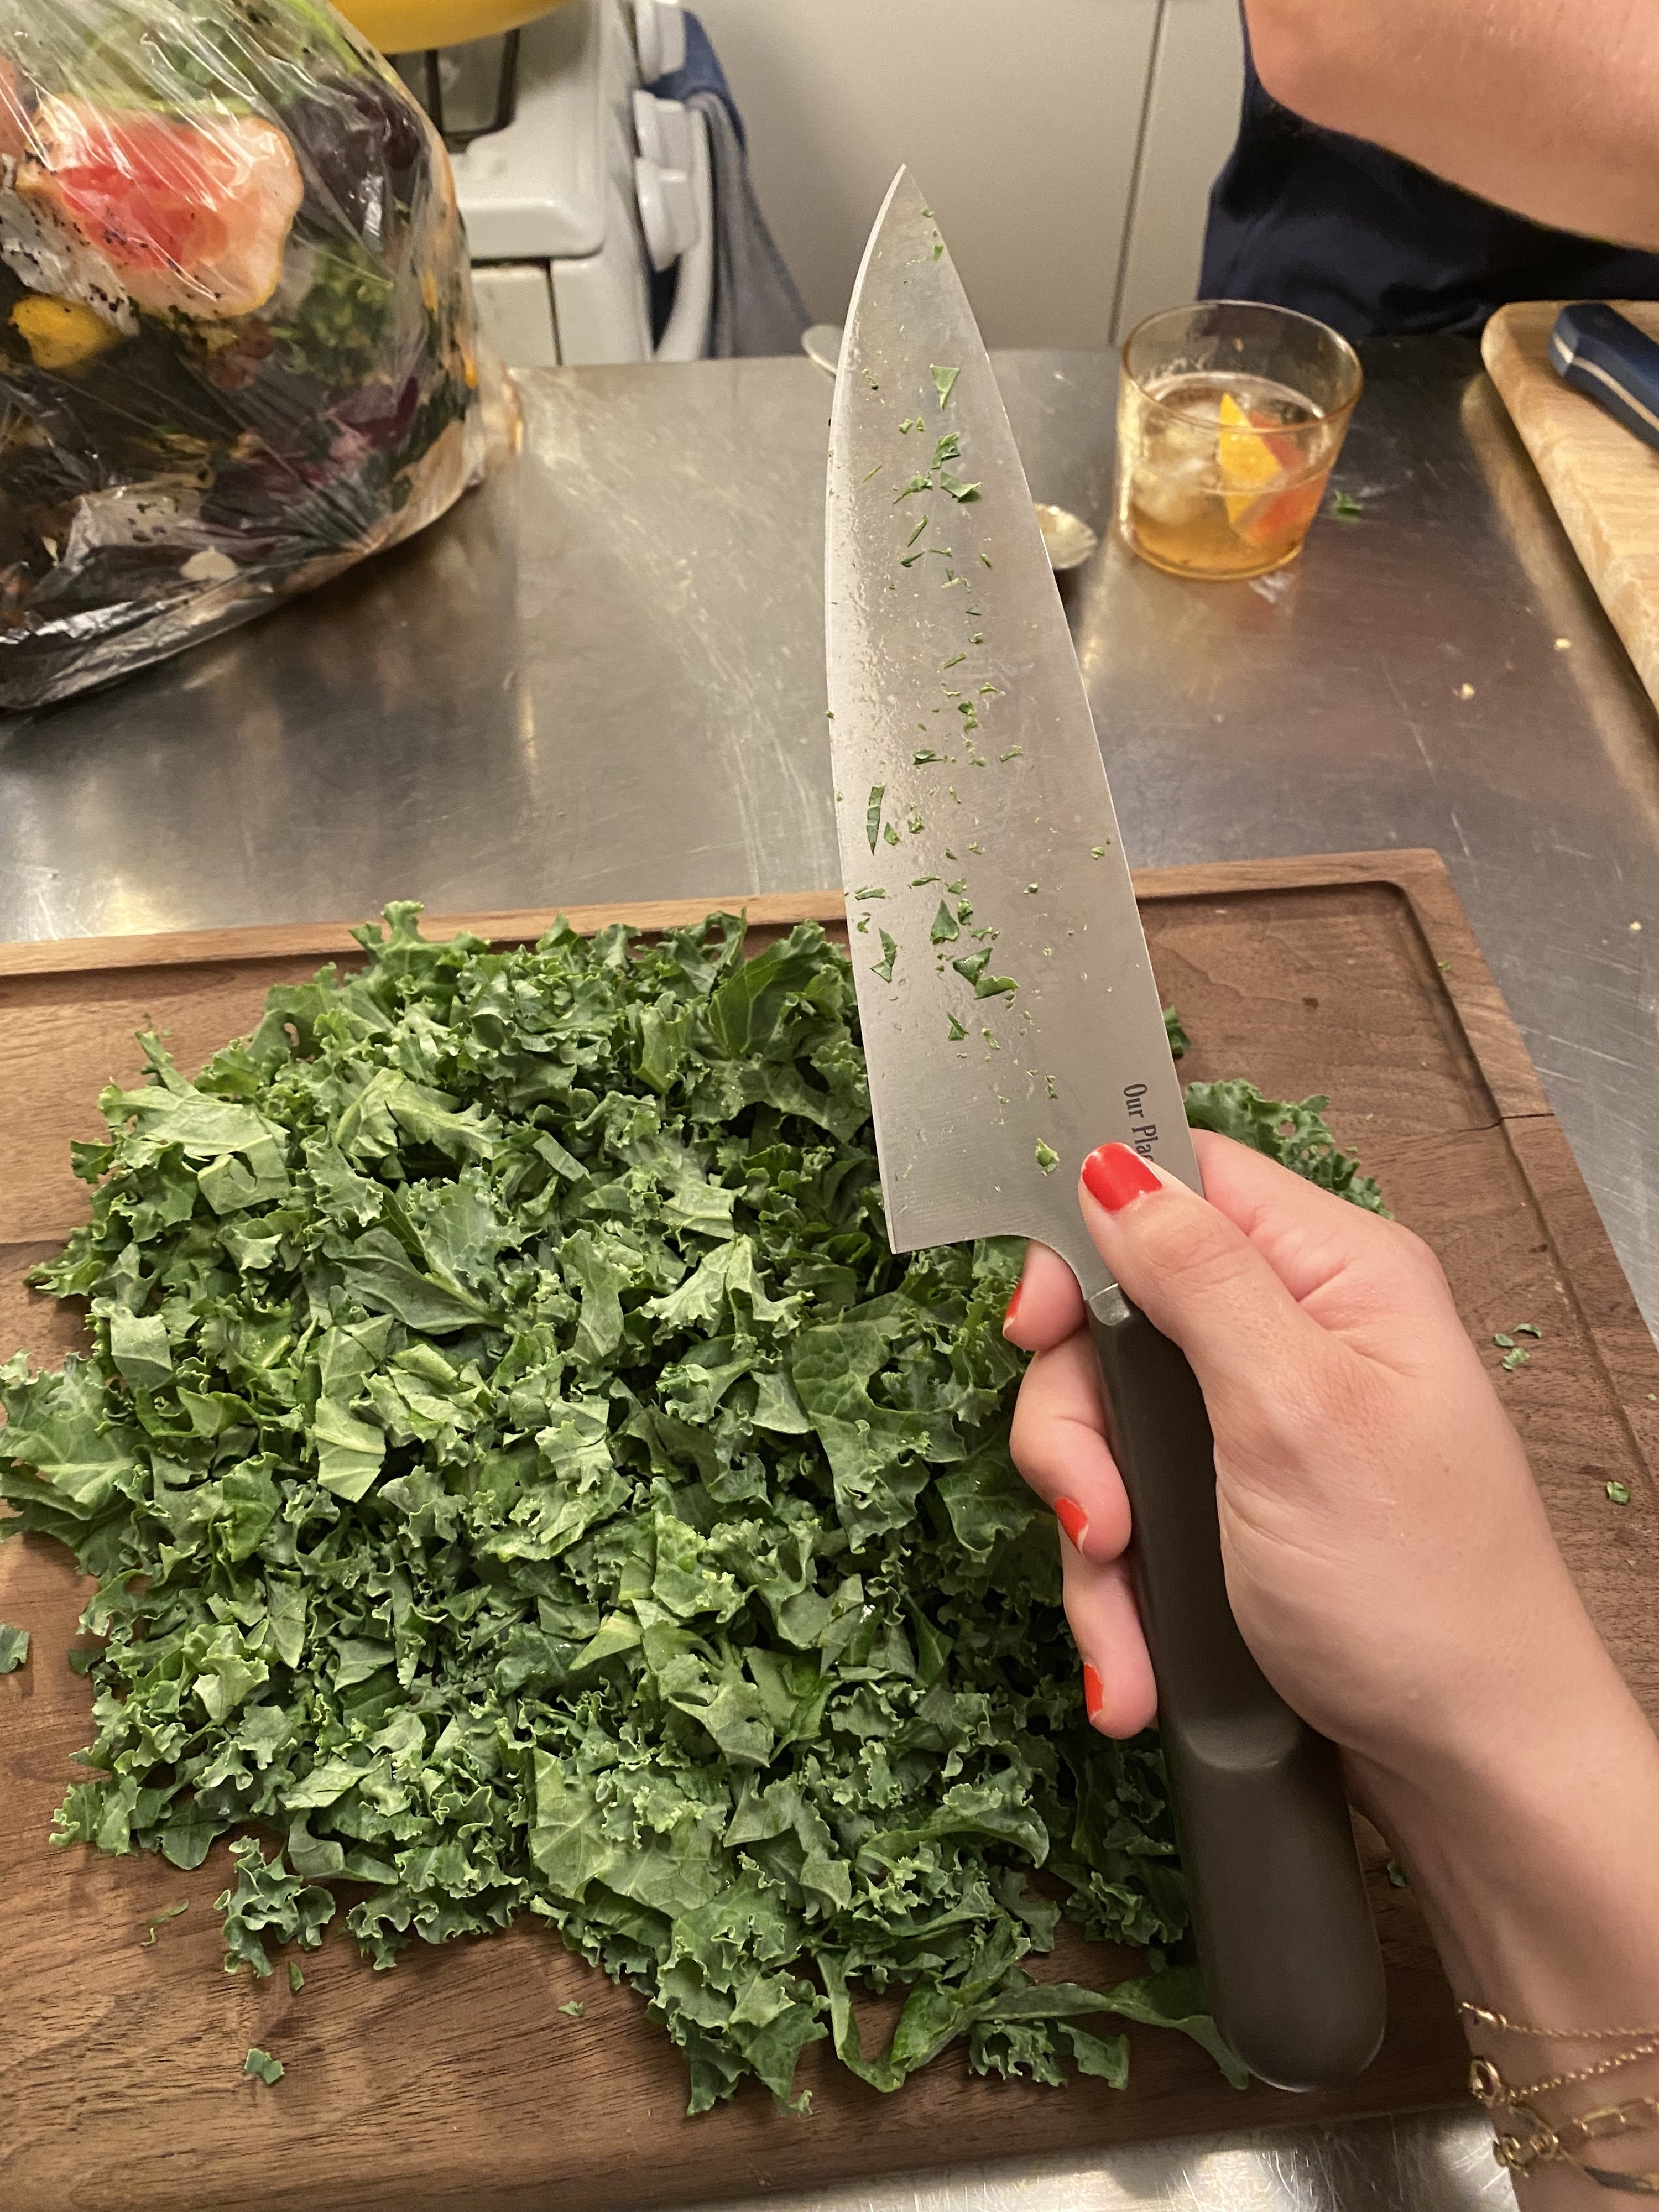 the knife and cutting board being used to chop kale